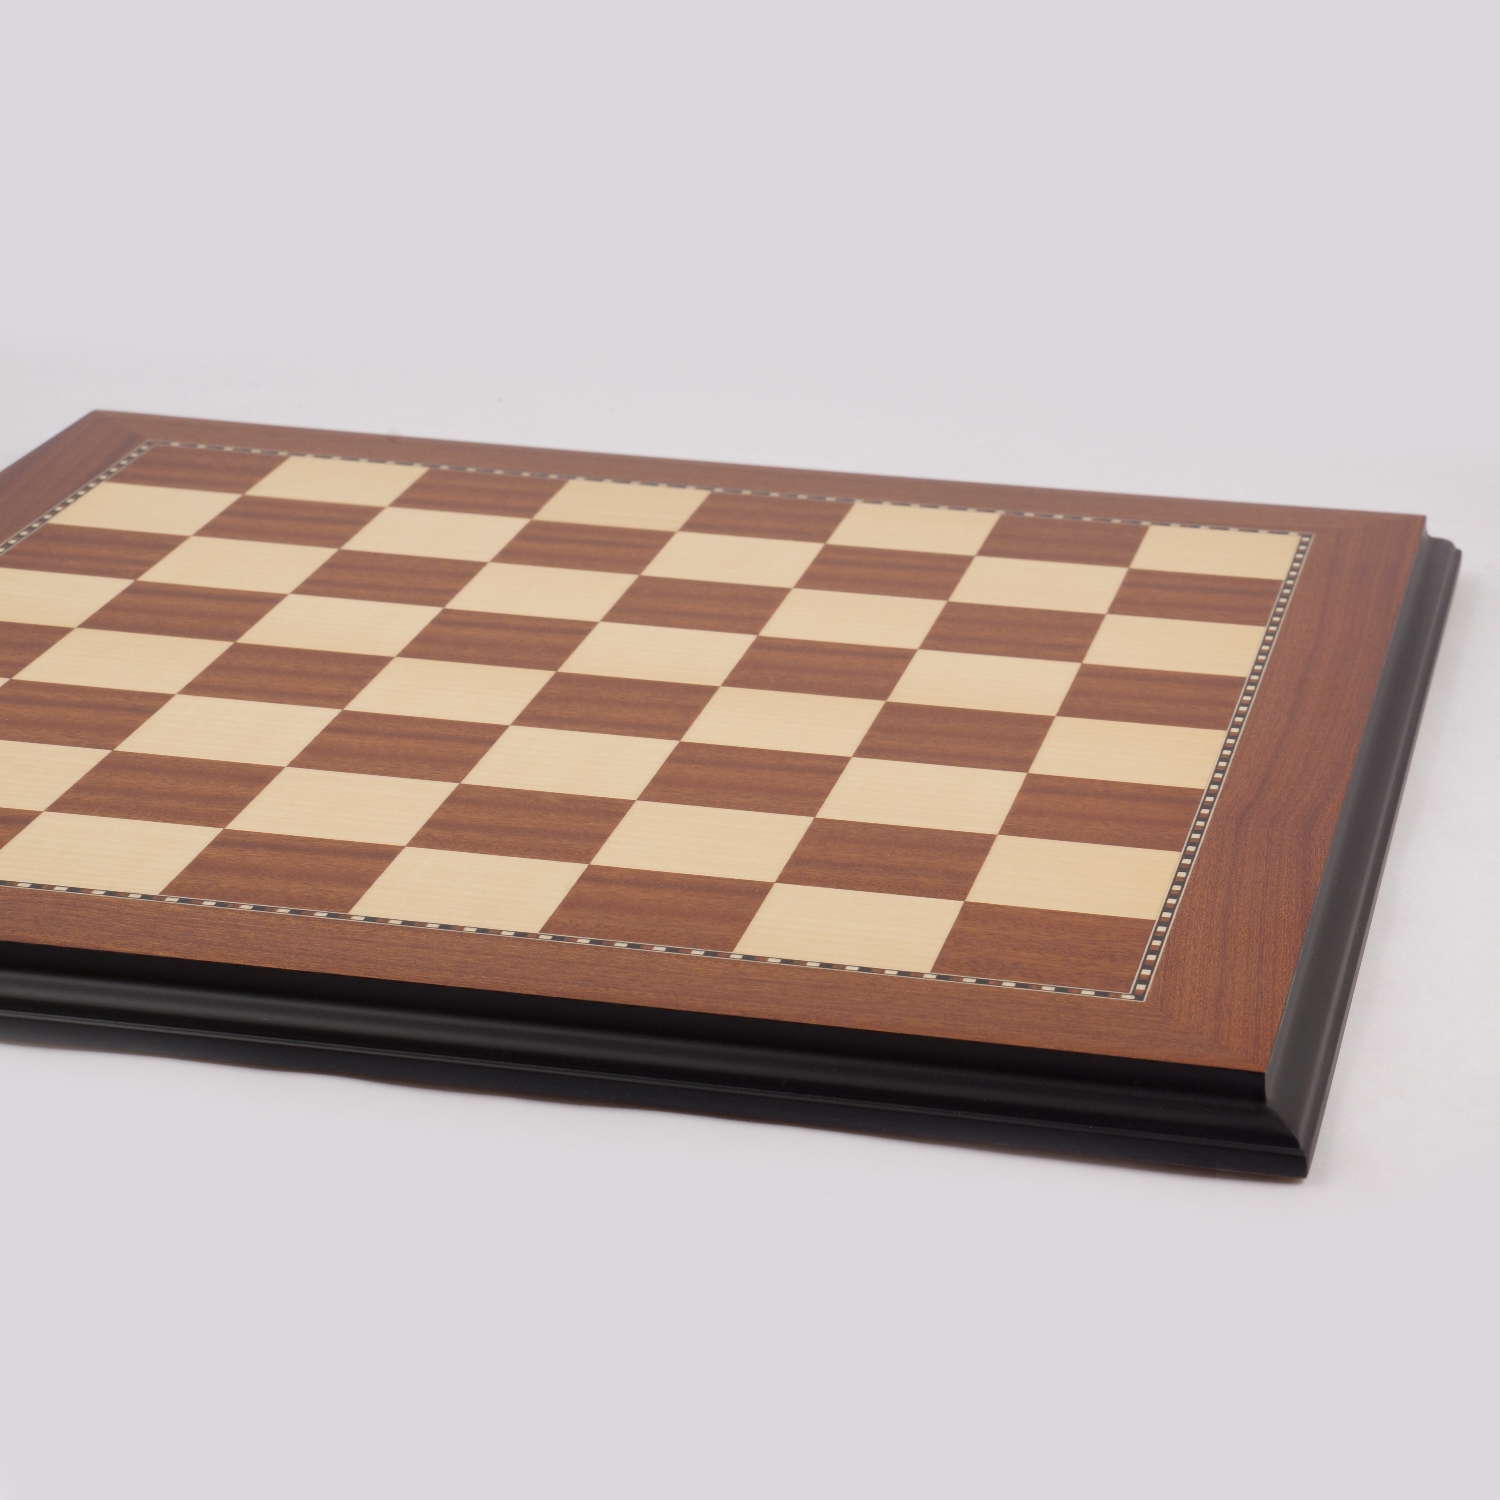 23 Presidential Style Chess Board